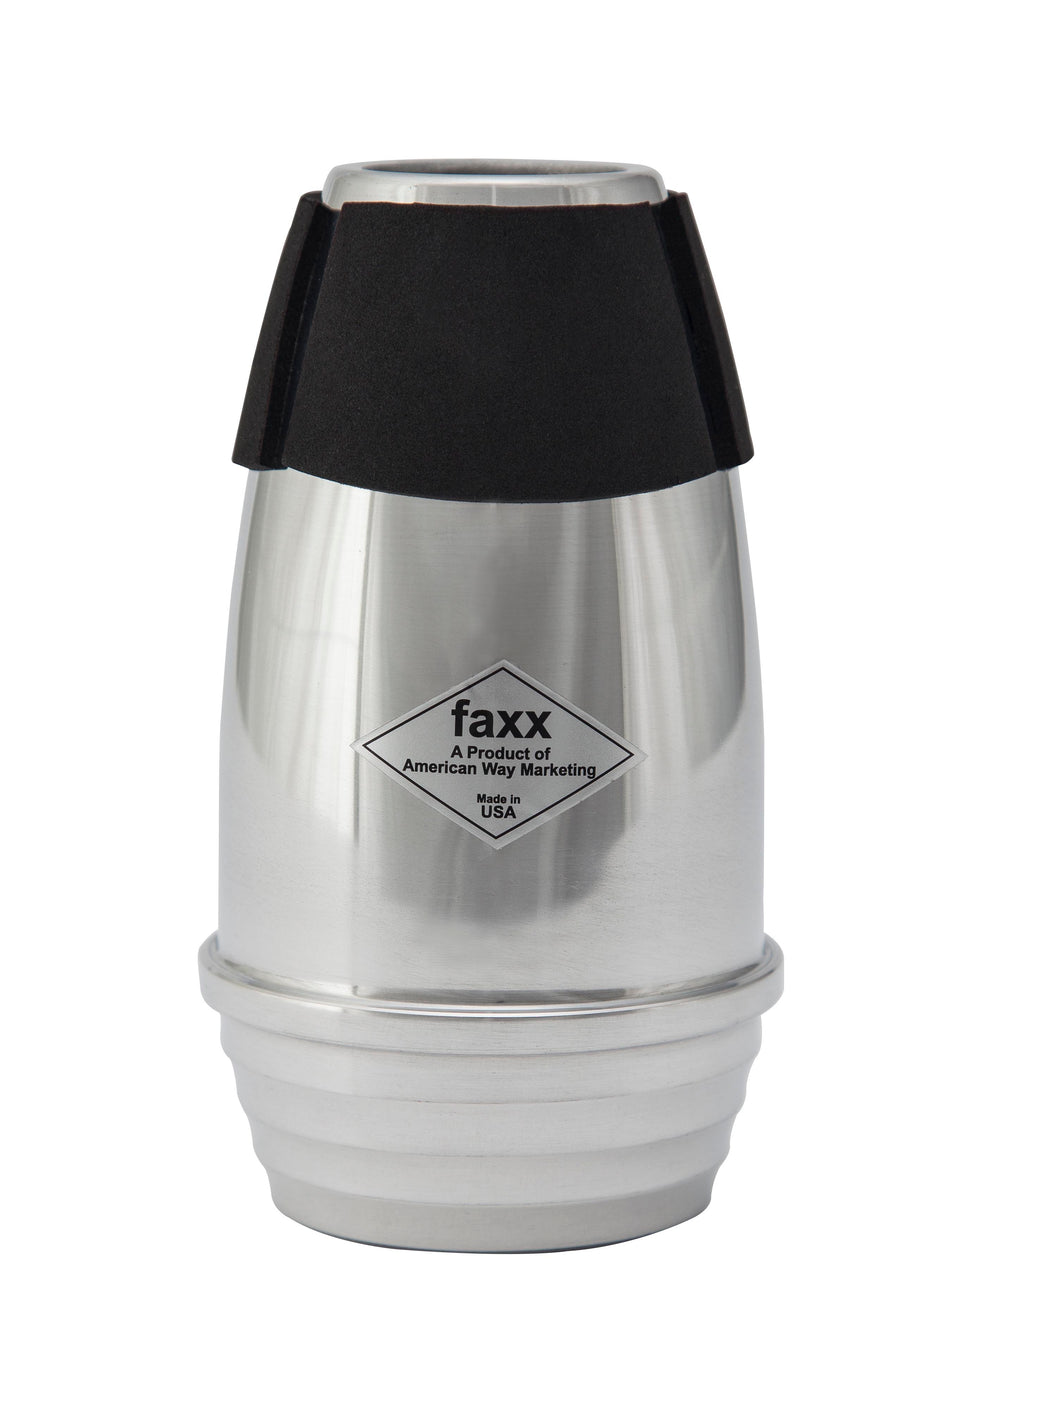 Faxx French Horn Practice Mute Compact Aluminium